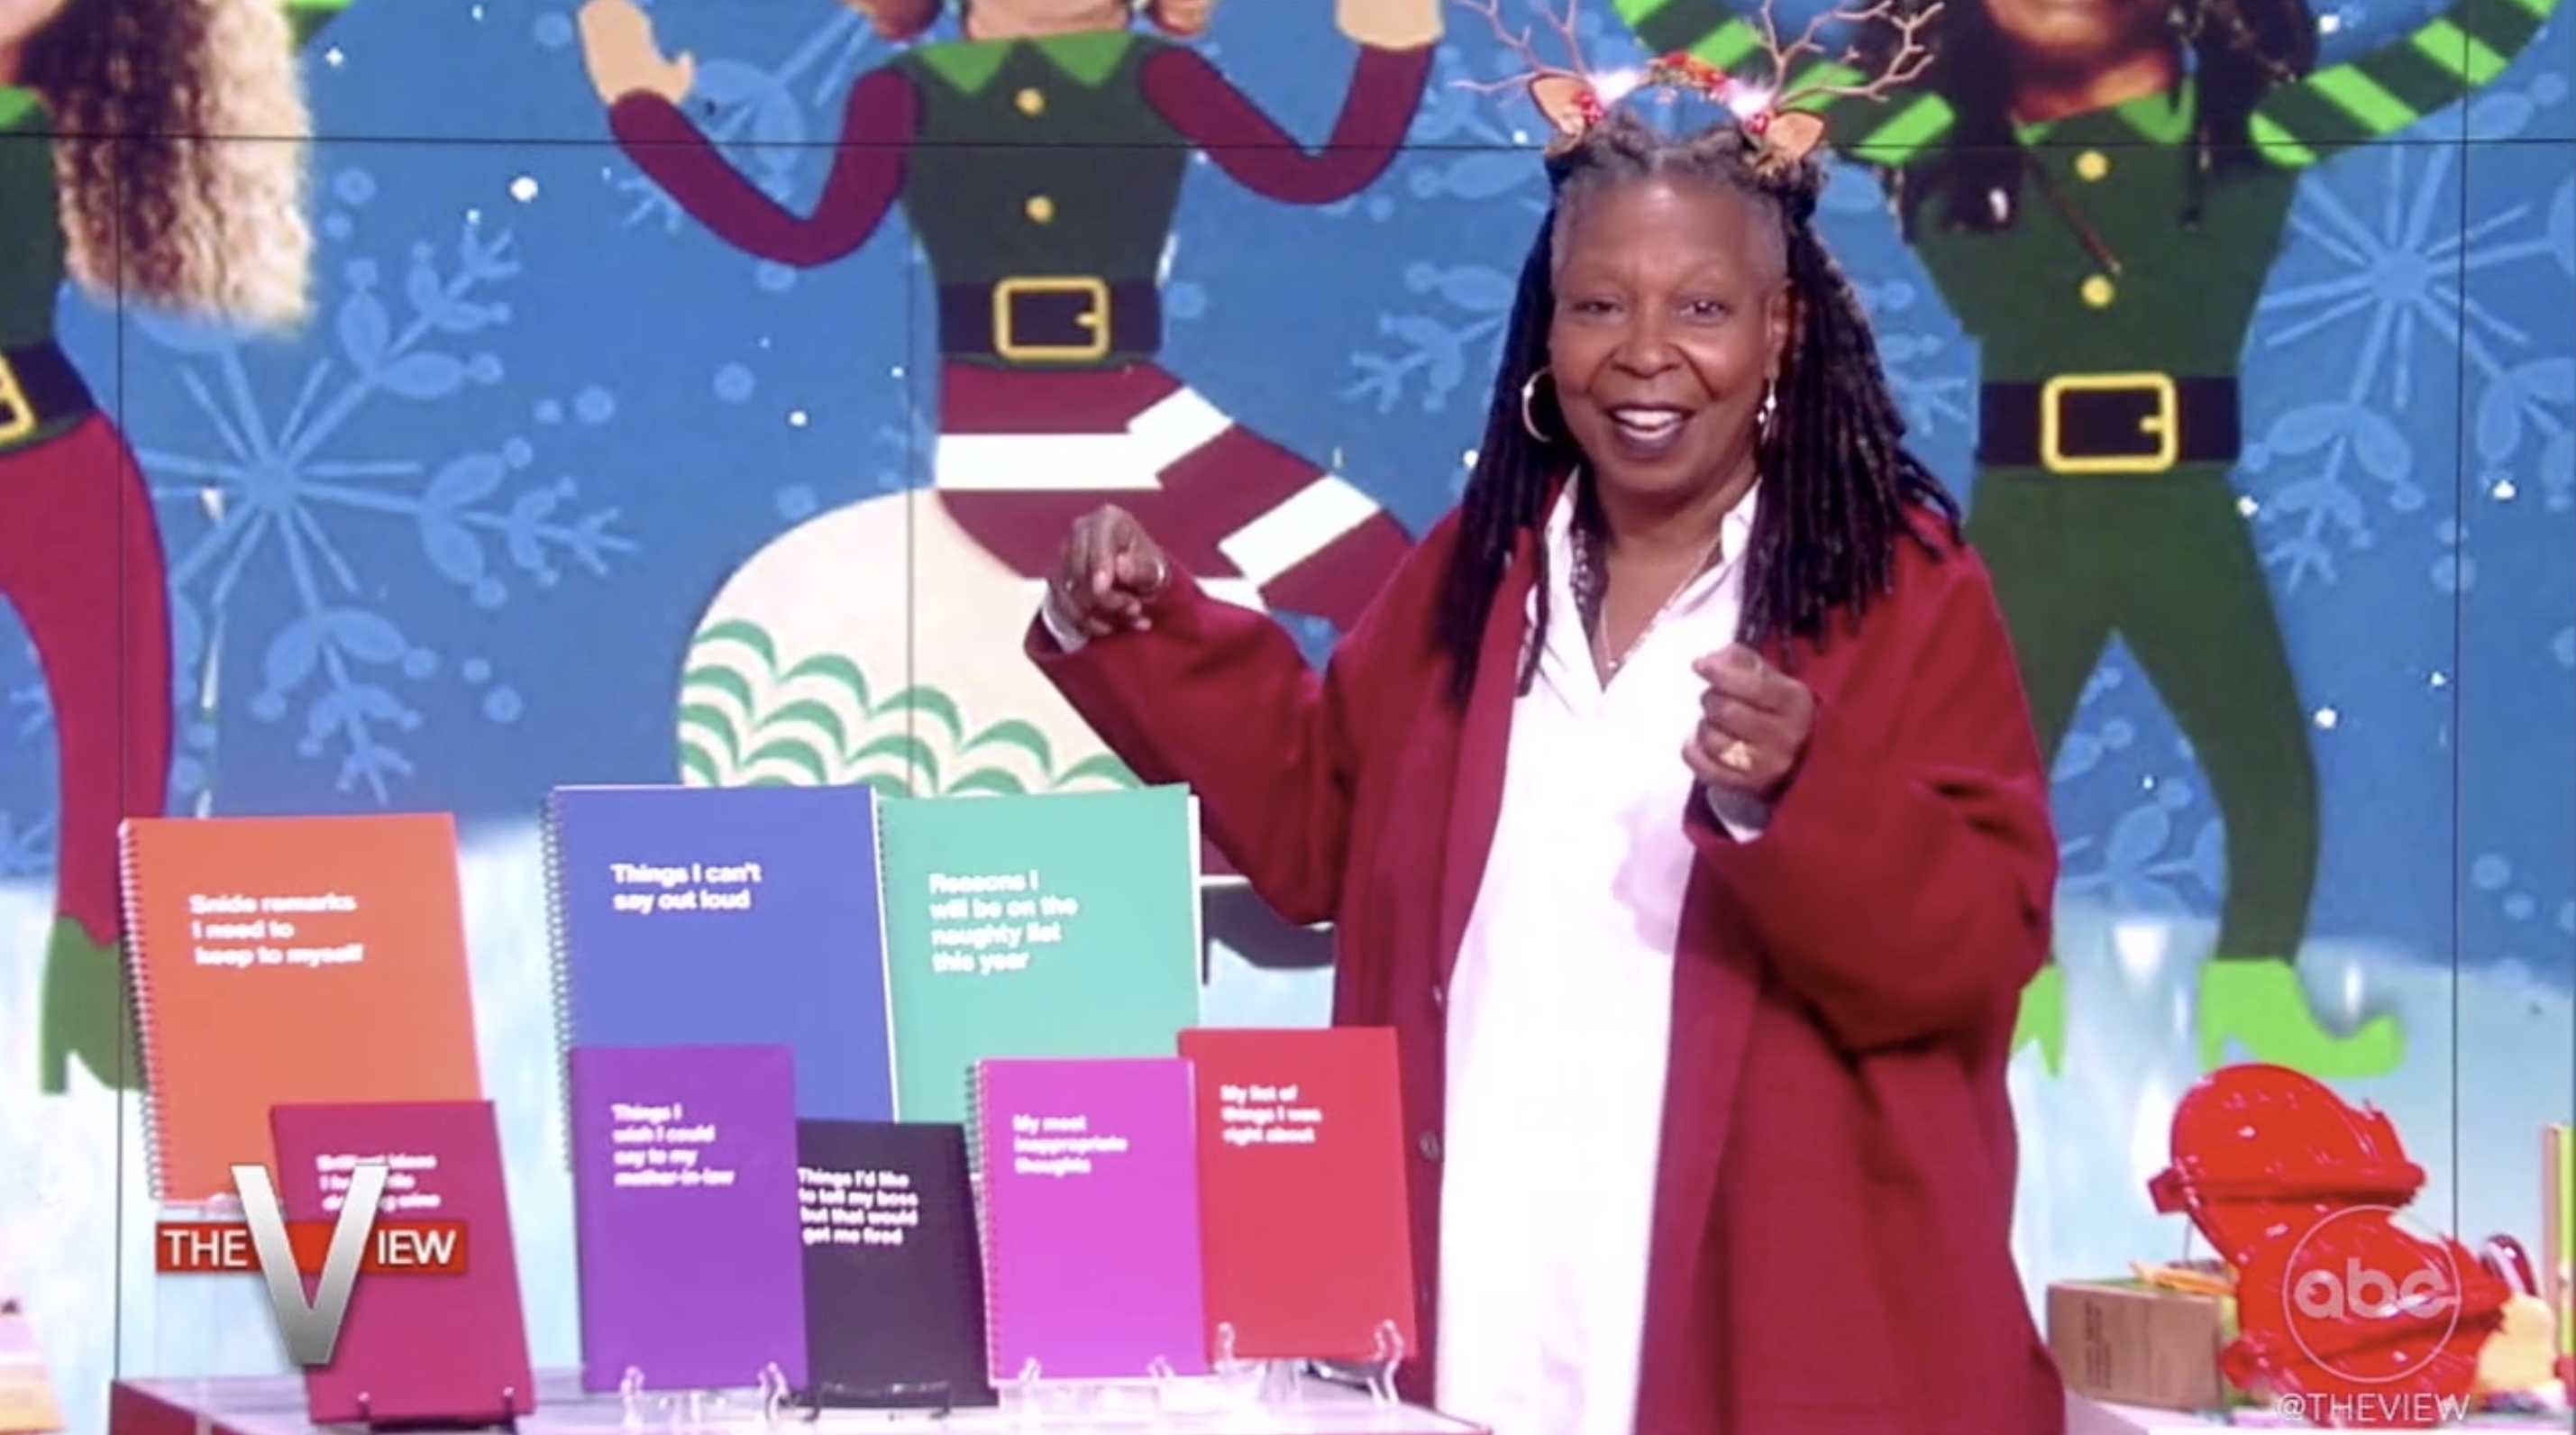 Whoopi has written children's books and other self-help books in the past